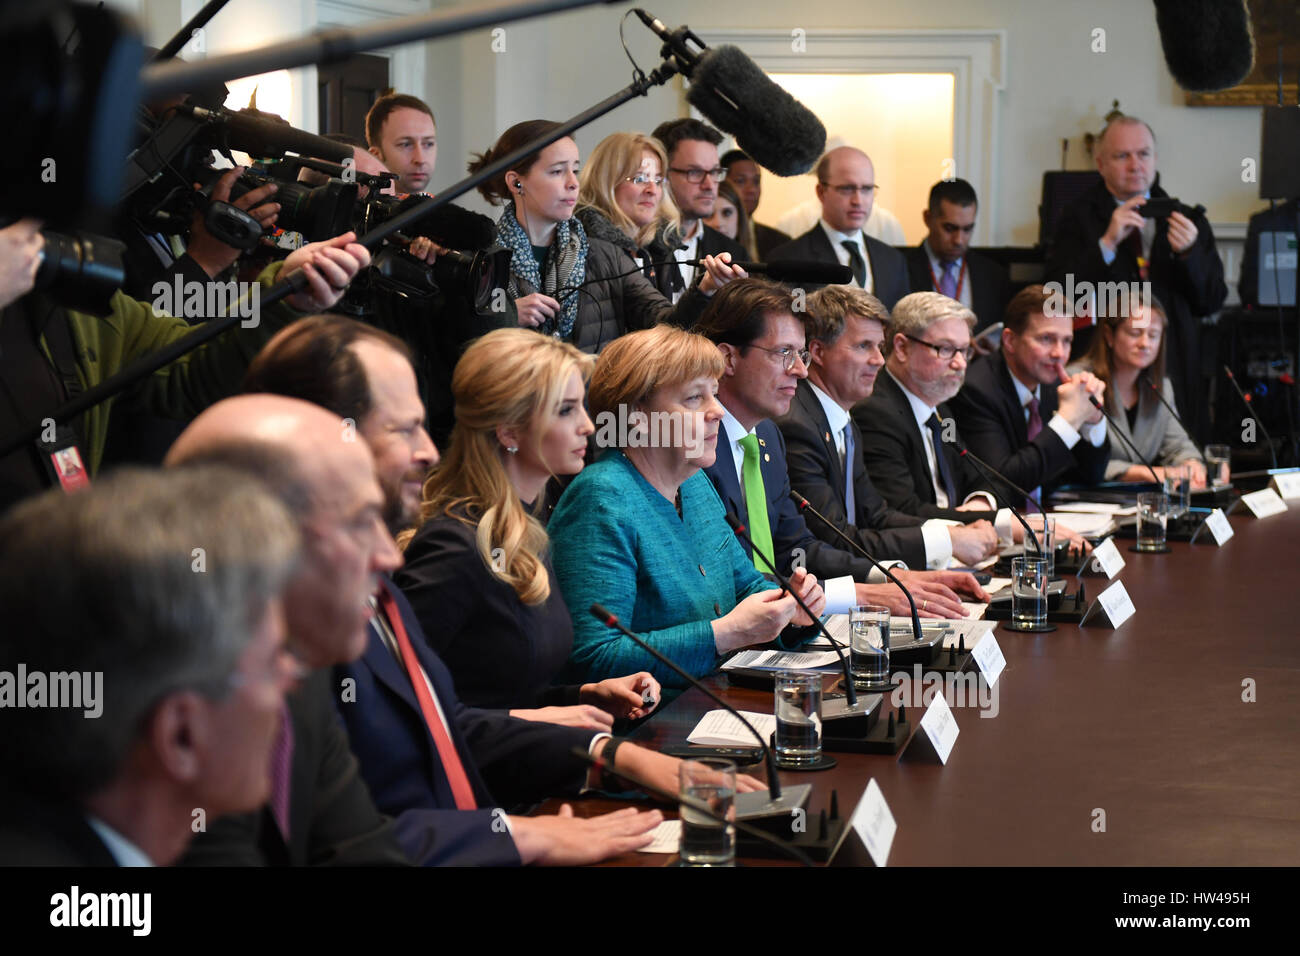 German Chancellor Angela Merkel (C) and Ivanka Trump (left center) particapate in a roundtable discussion on vocational training with United States and German business leaders lead by President Donald Trump (not seen) in the Cabinet Room of the White House in Washington, DC on March 17, 2017. Credit: Photo by Pat Benic/Pool via CNP /MediaPunch Stock Photo